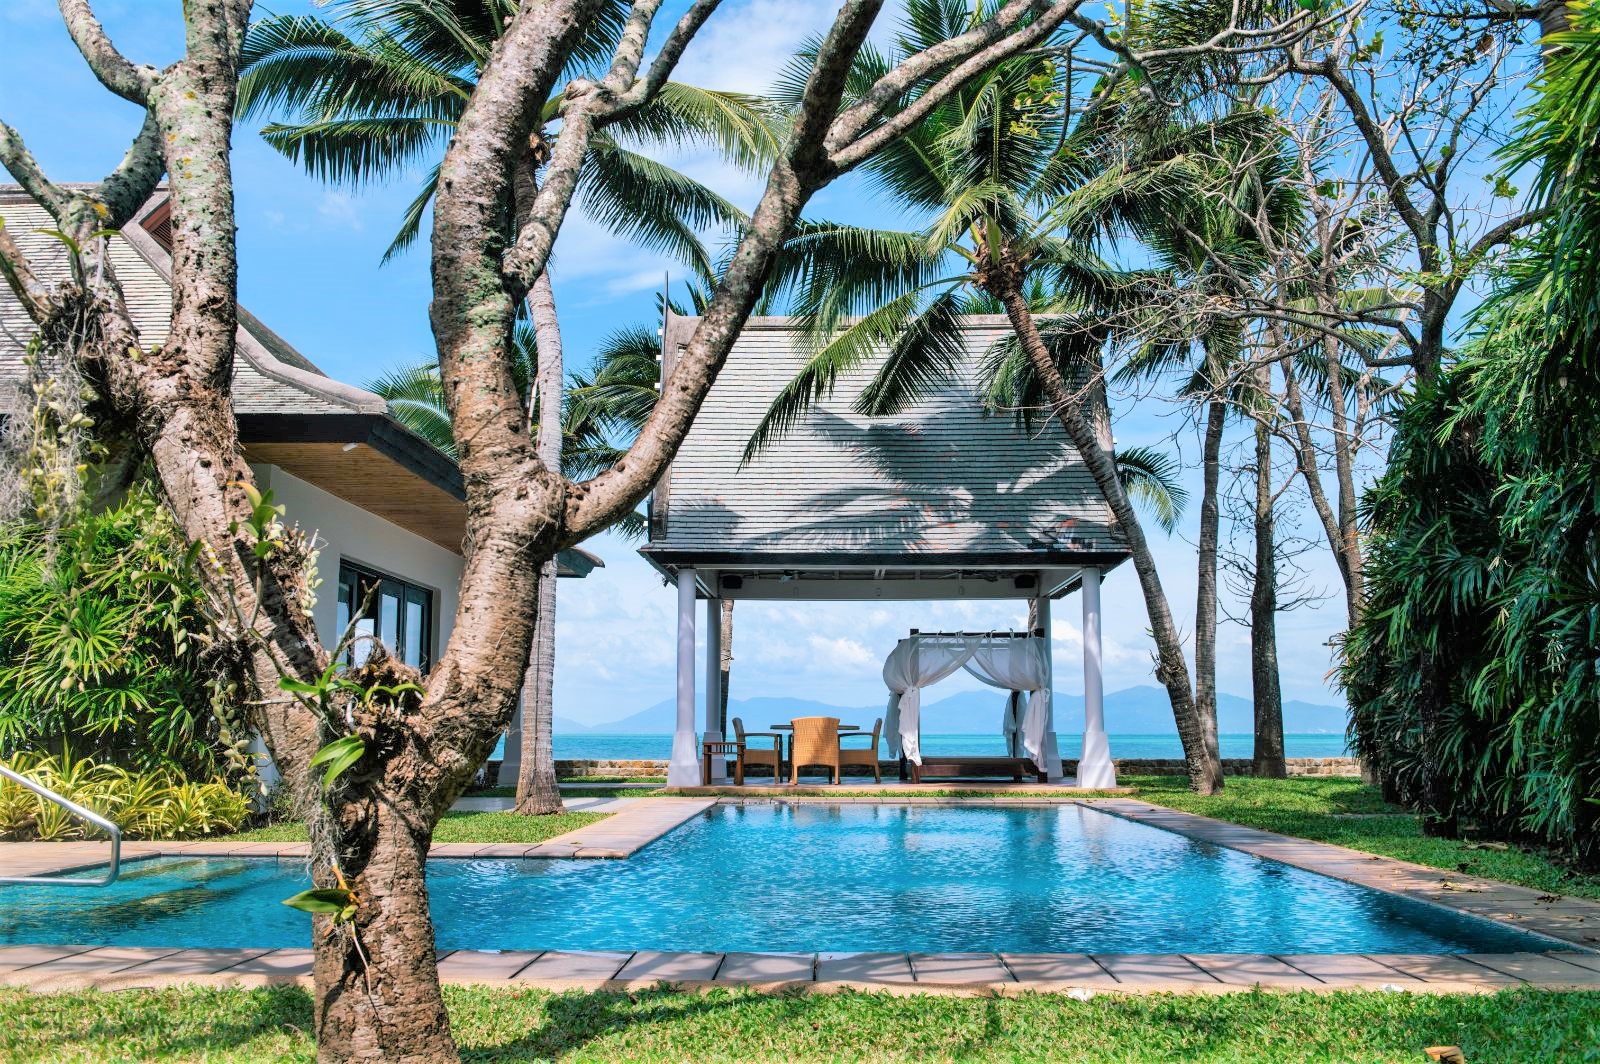 Swimming pool and ocean views at Villa Hibiscus on Koh Samui in Thailand